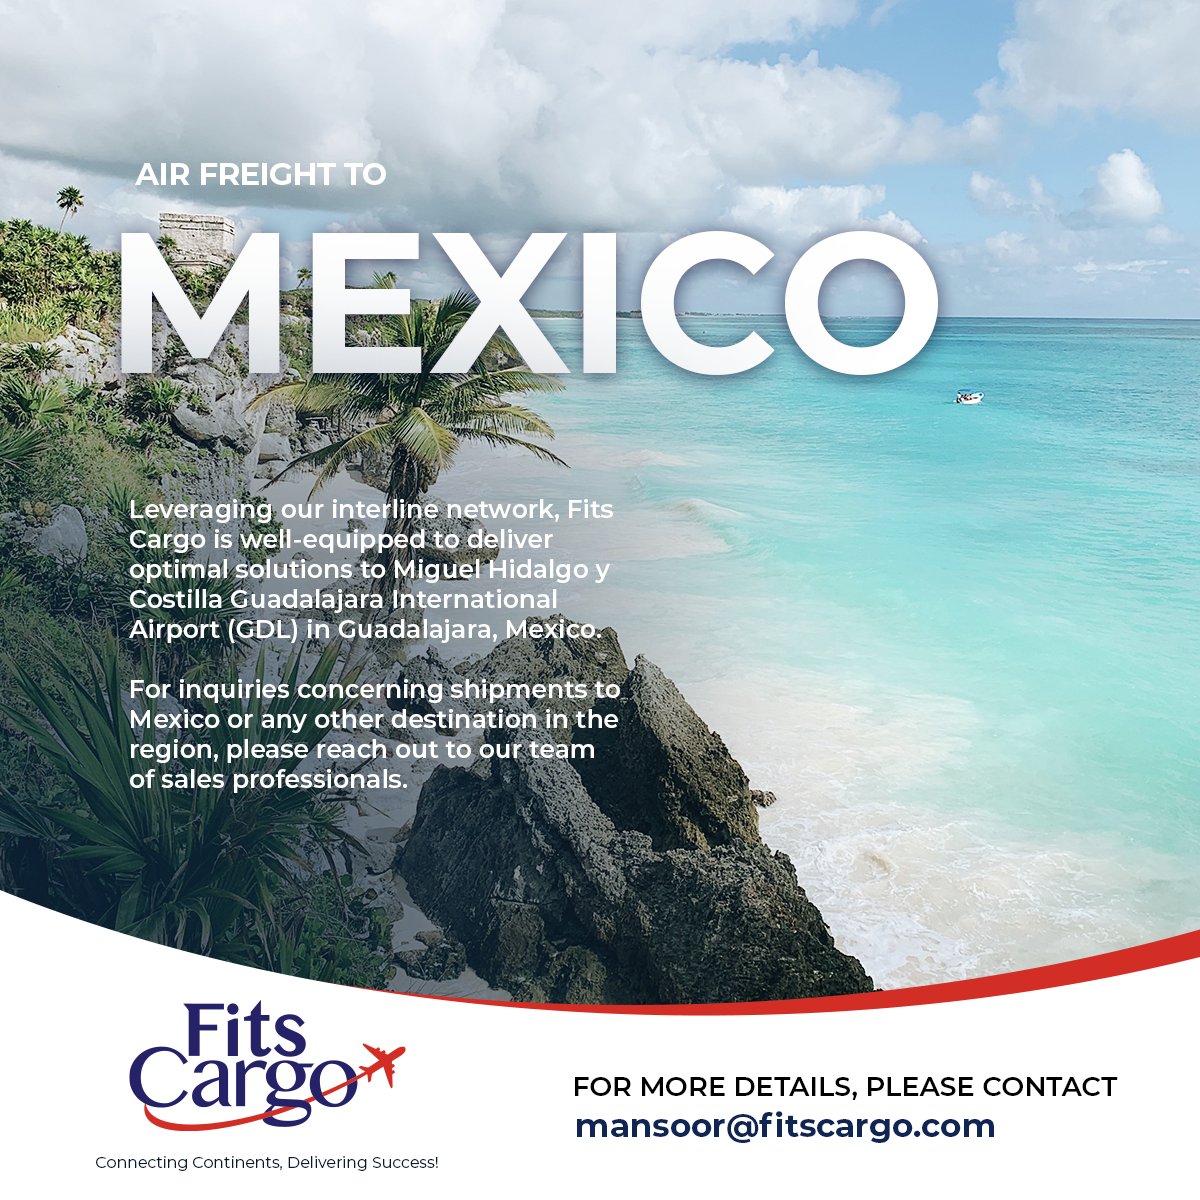 For any Air export shipments from BOM, COK or GOI to Miguel Hidalgo y Costilla Guadalajara International Airport (GDL), Mexico, please feel free to contact me on mansoor@fitscargo.com #Aircargo #Export #Airfreight #import #logistics #Freightforwarding #Supplychain #Pharmaexport